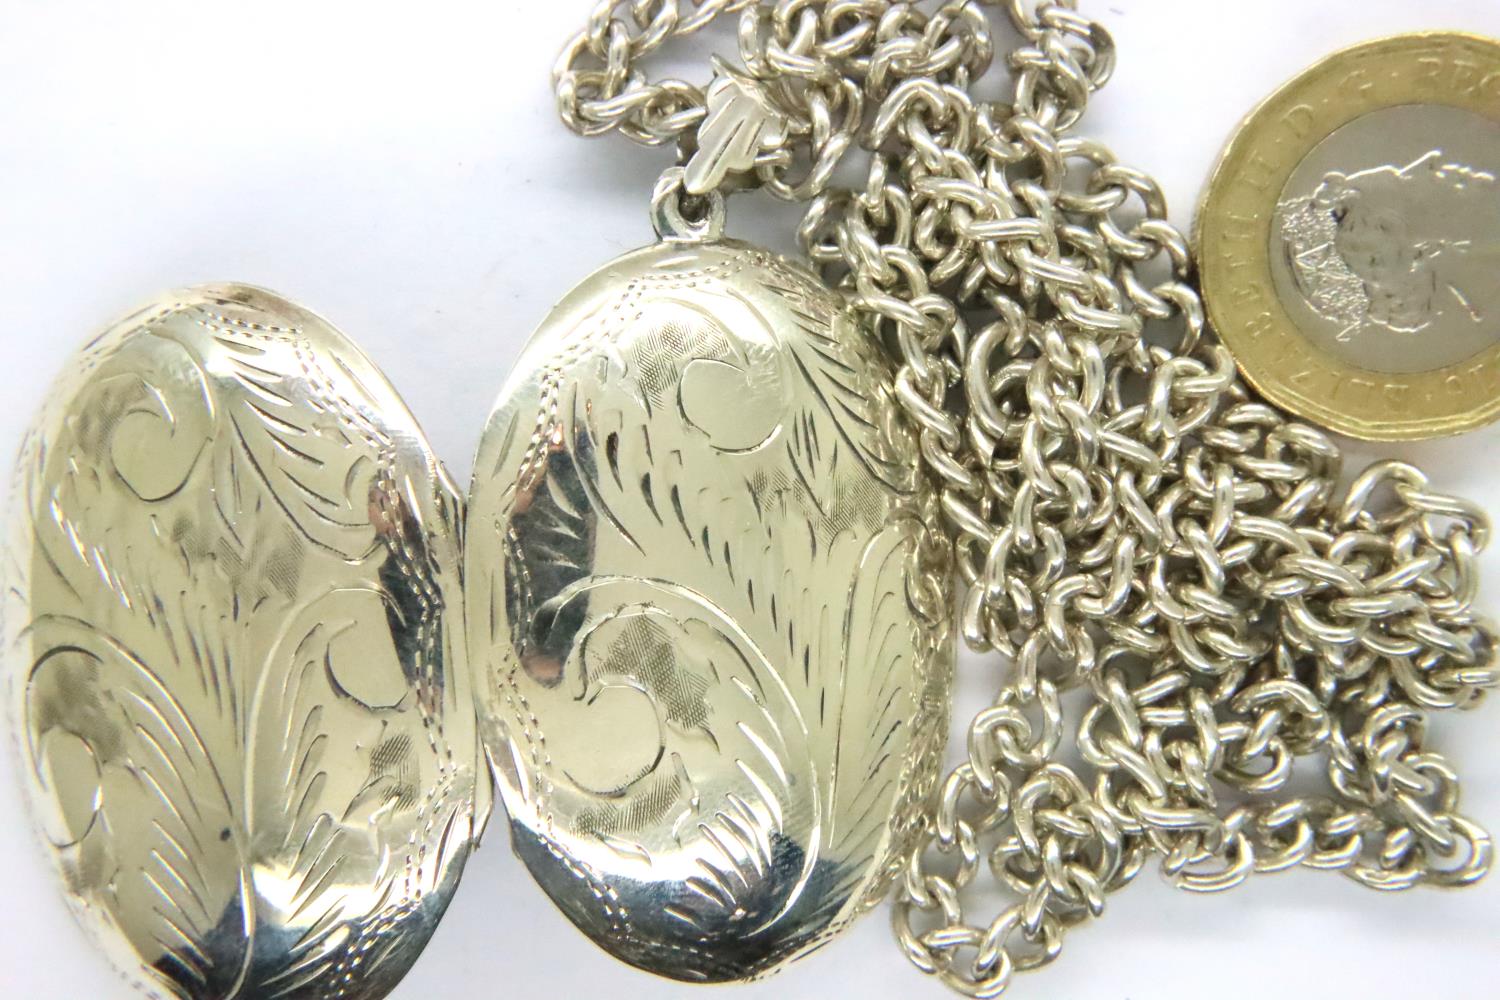 925 silver locket and neck chain. Pendant H: 4 cm, chain L: 58 cm. P&P Group 1 (£14+VAT for the - Image 2 of 3